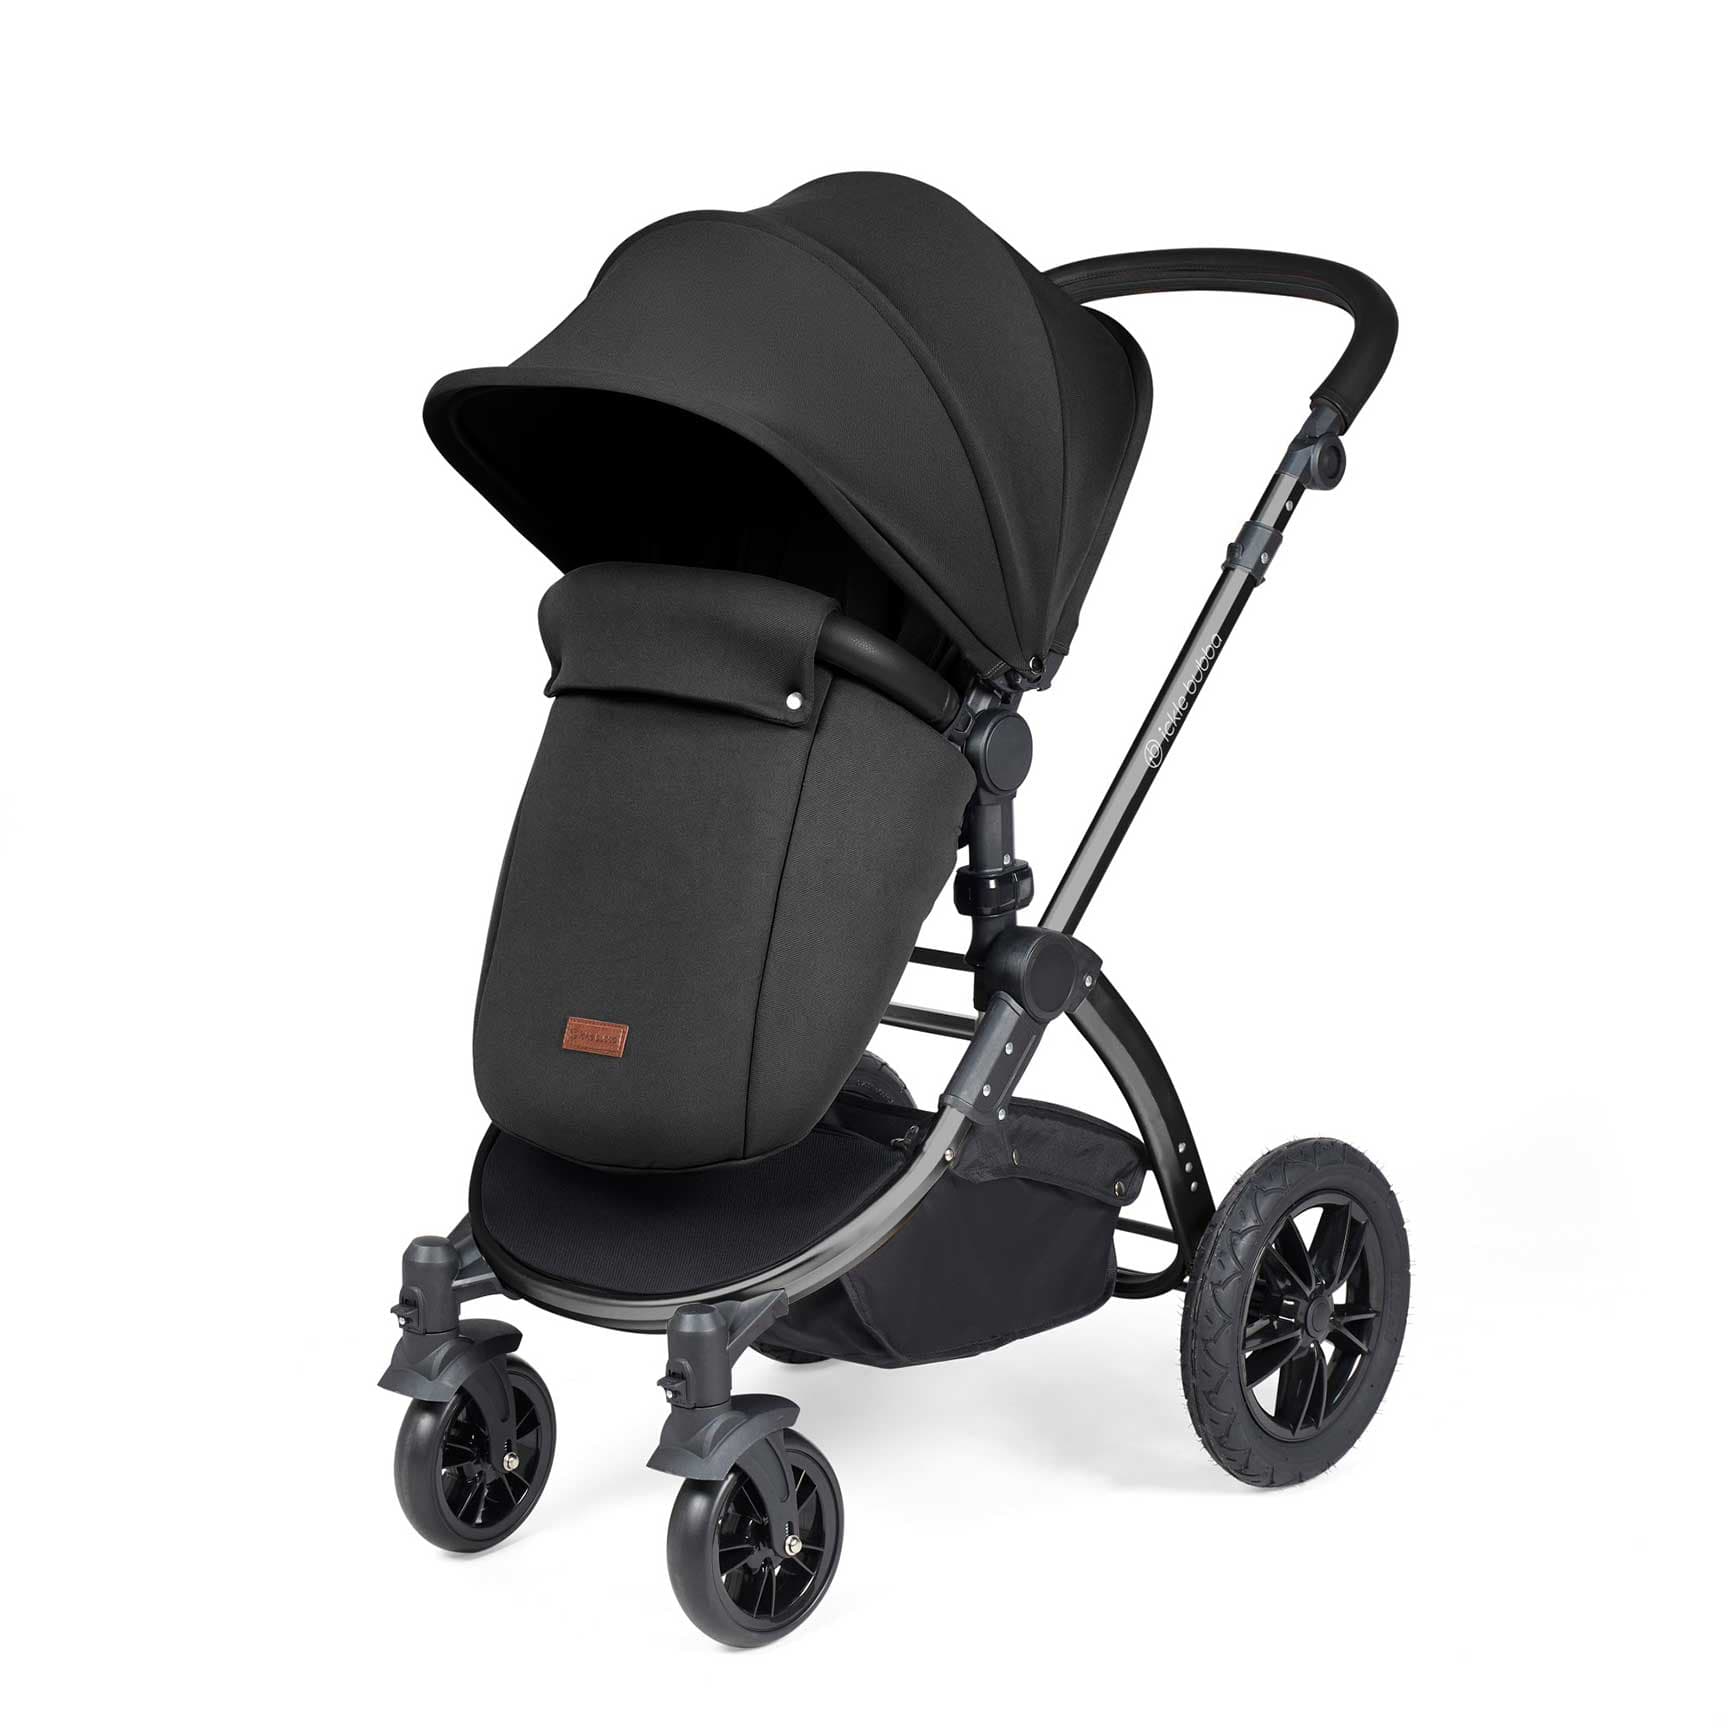 Ickle Bubba Stomp Luxe All-in-One Travel System with Isofix Base in Black/Midnight/Black Travel Systems 10-011-300-202 5056515026436